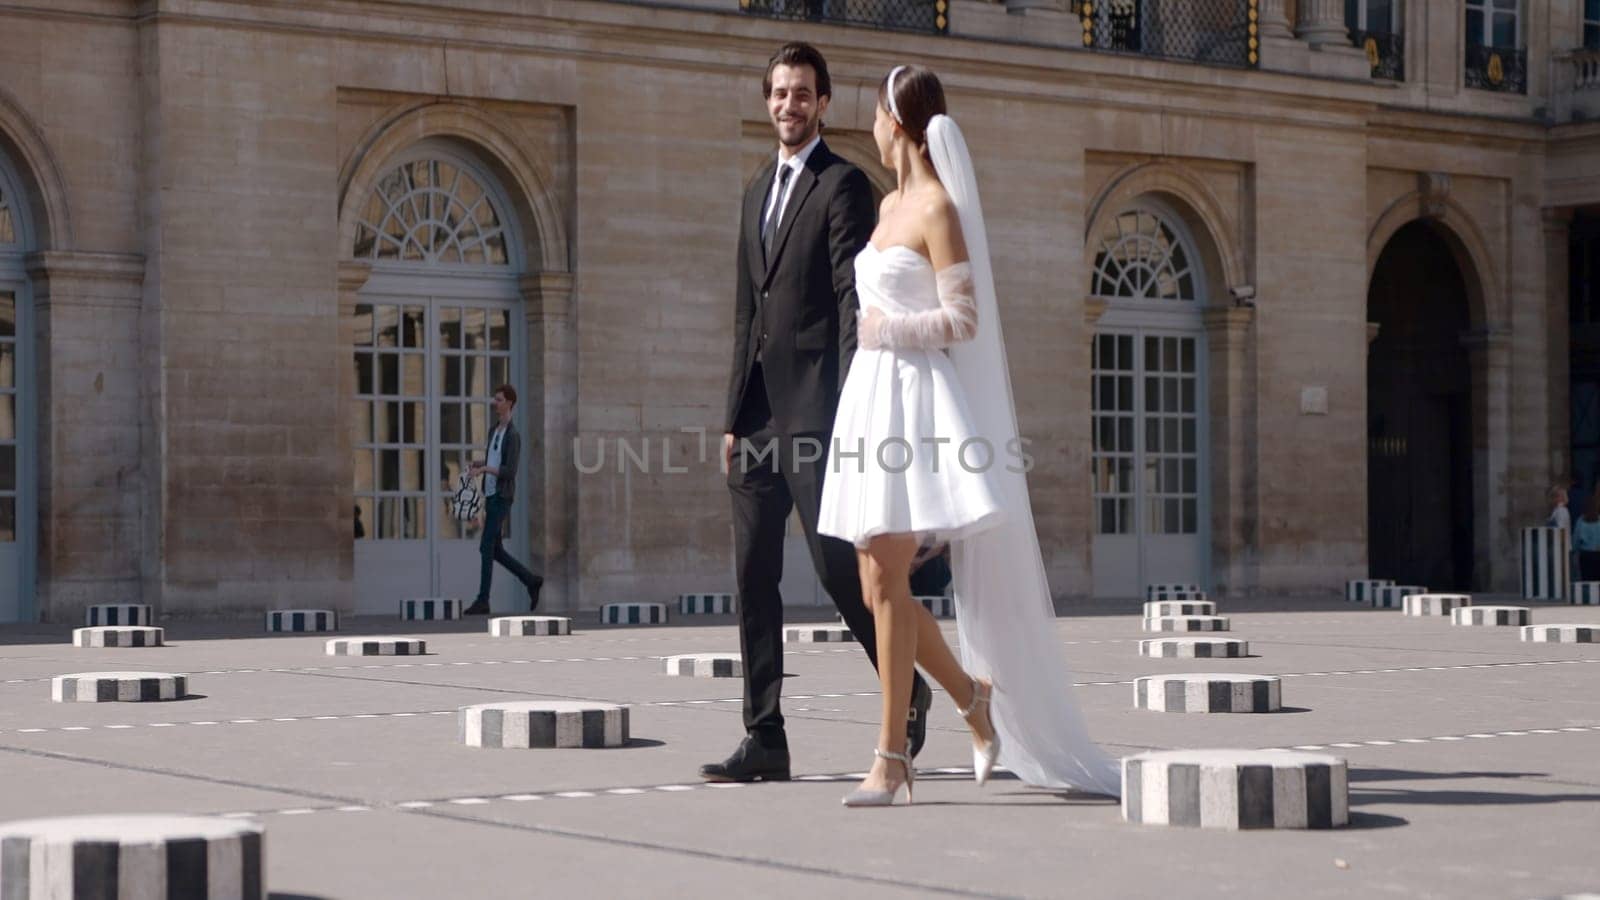 Beautiful newlyweds walking in city on sunny day. Action. Stylish wedding dresses for newlyweds walking on square. Happy newlyweds walk hand in hand in city square.